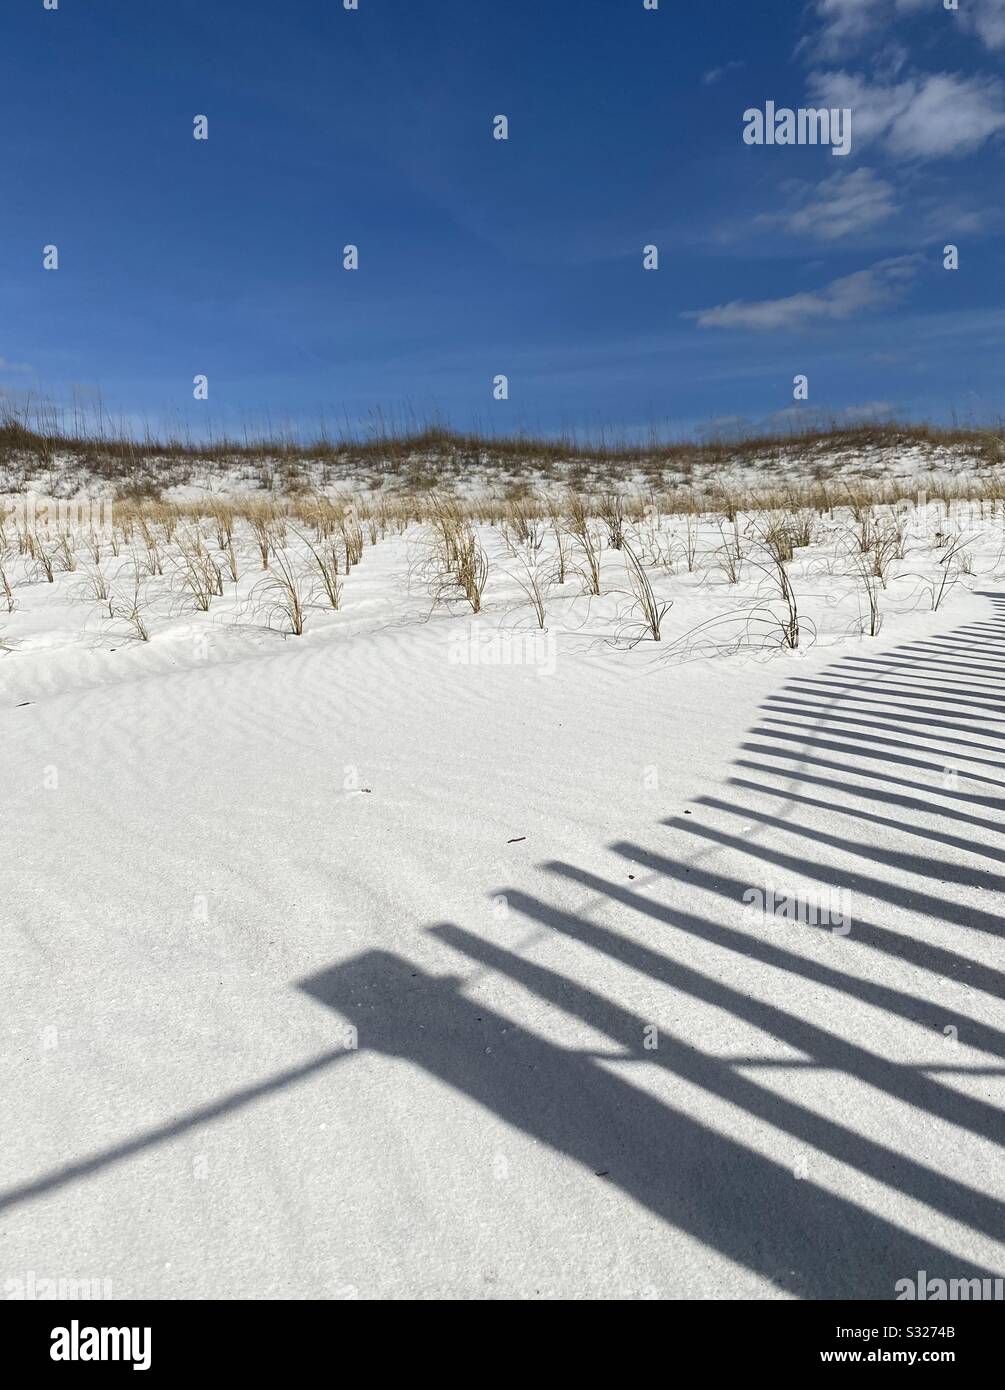 White sand beach with shadows of wooden fence cast upon the sand Stock Photo